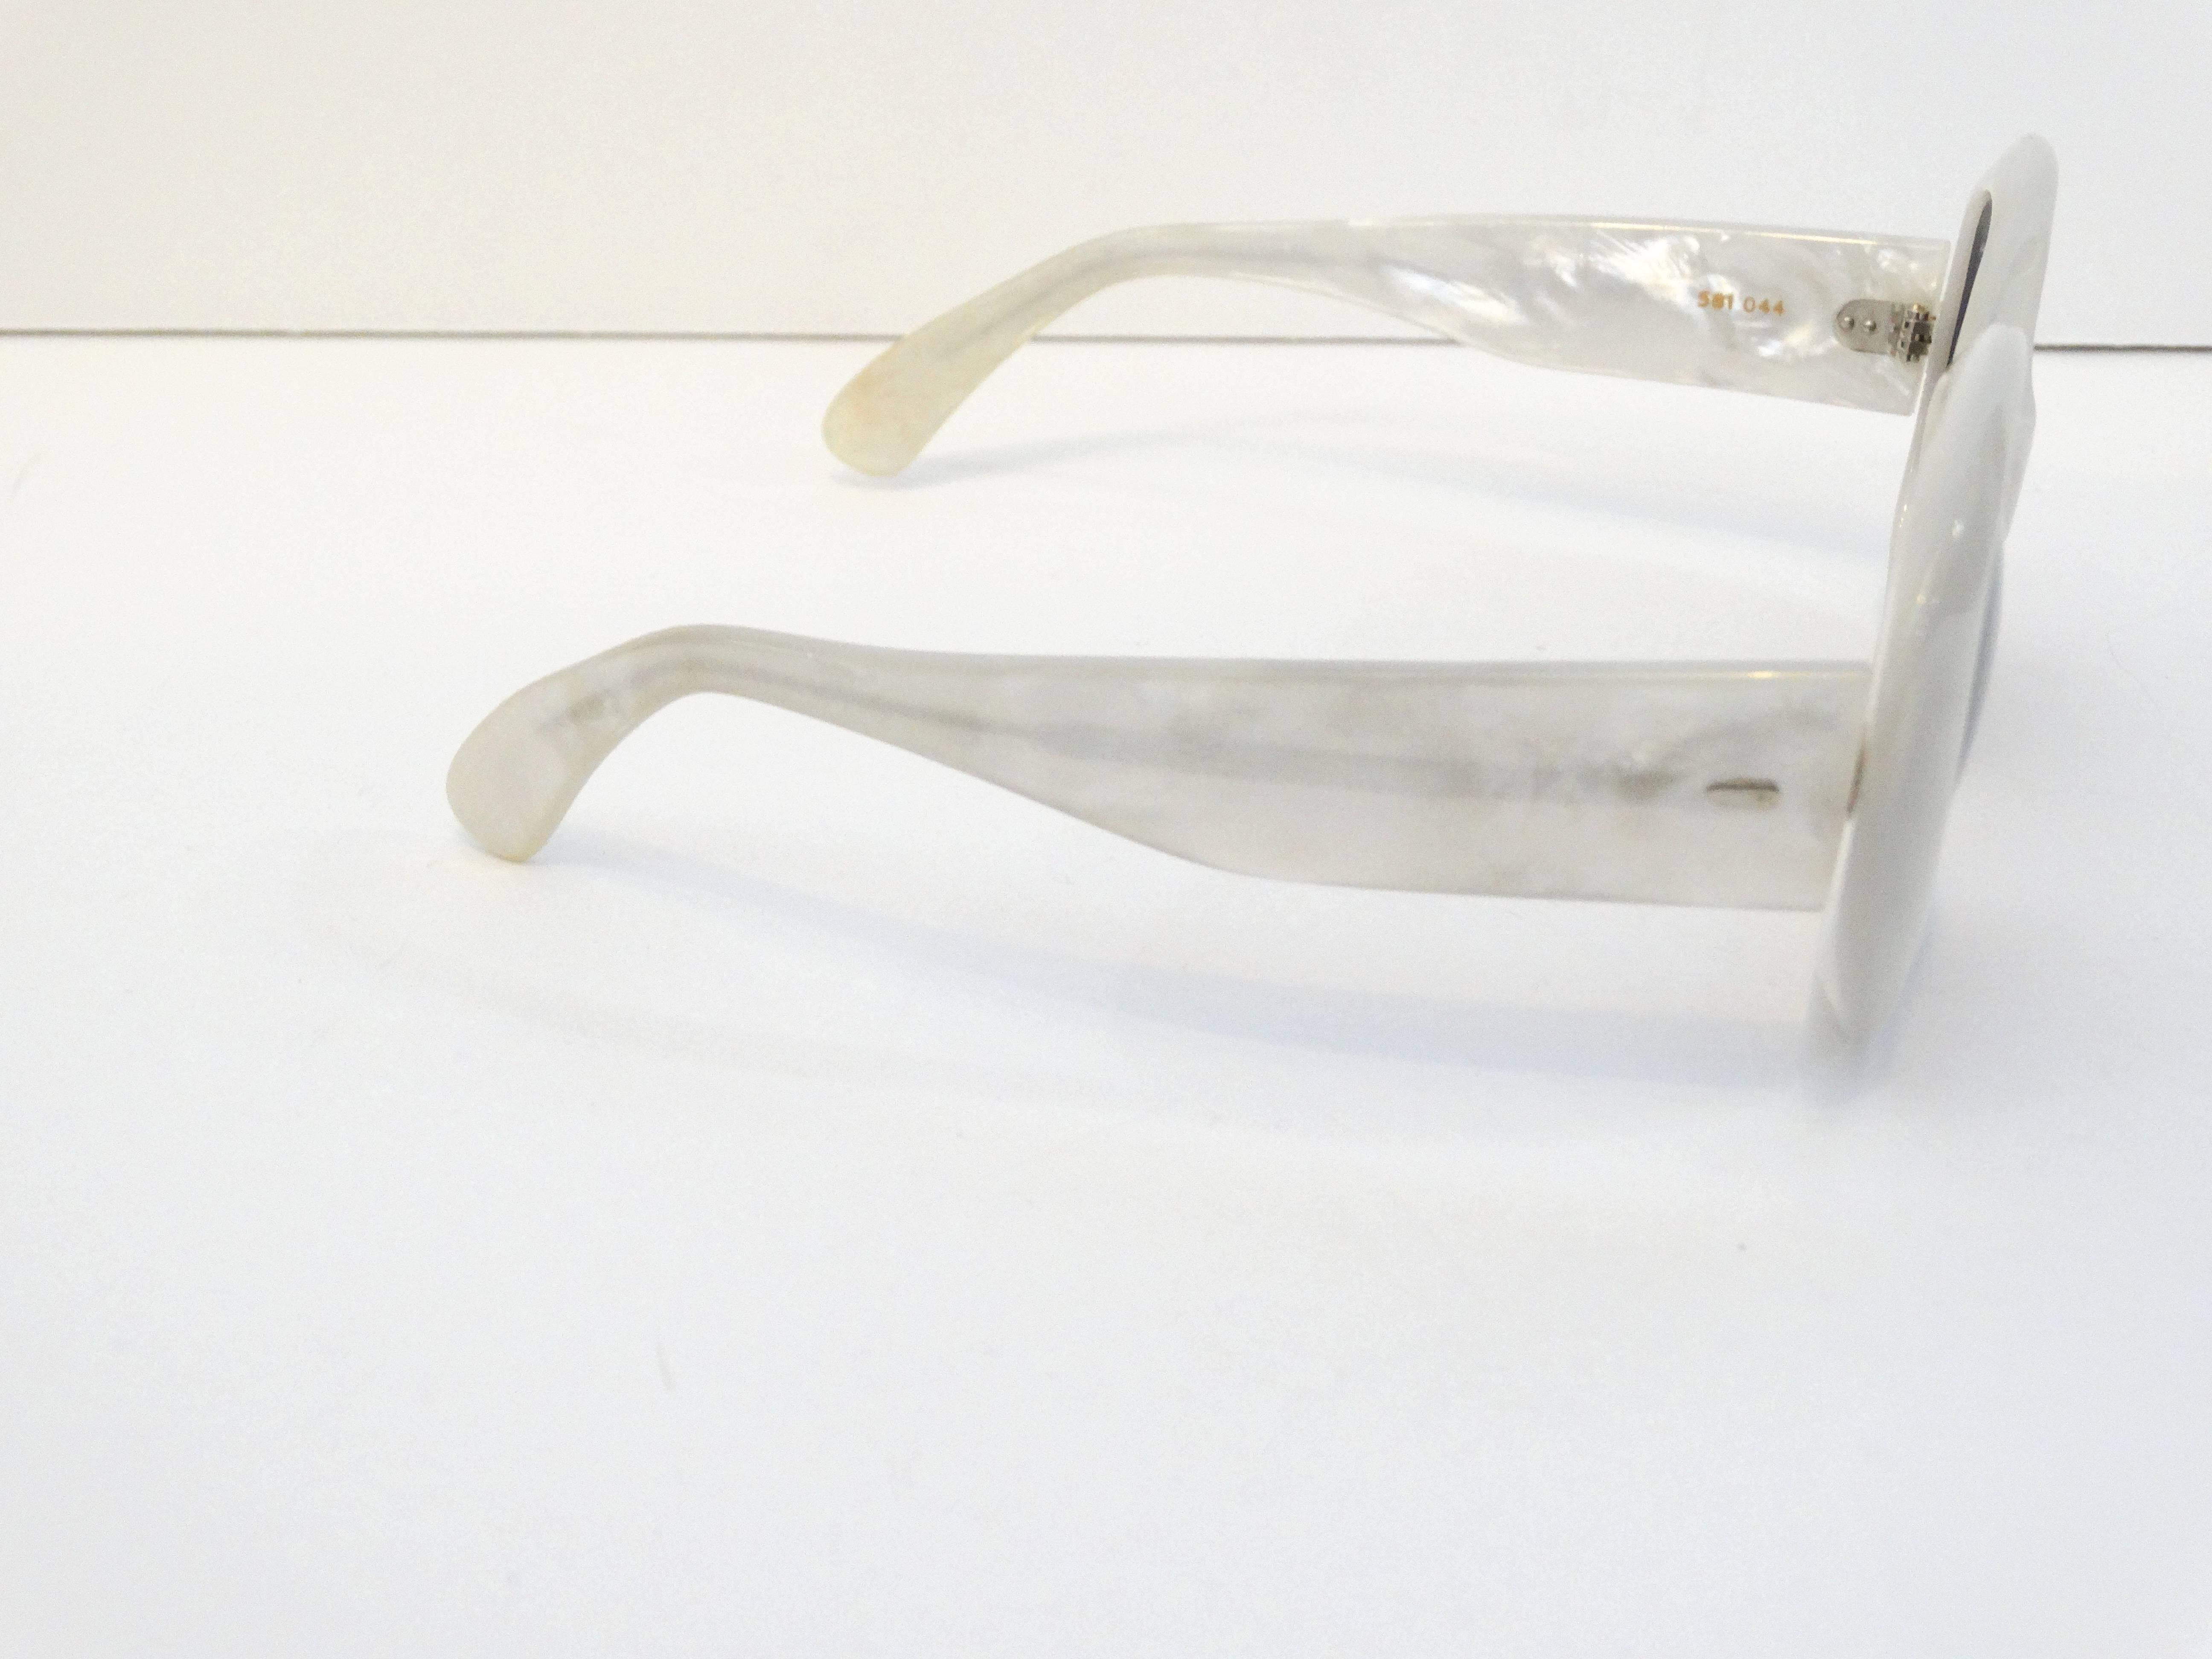 The '60s were truly revolutionary years that sent rockets and hemlines soaring. Launch your own lunar look with these 1960's Claude Montana Mod Mother of Pearl White Sunglasses. All eyes will be on you when you're sporting these specs in the